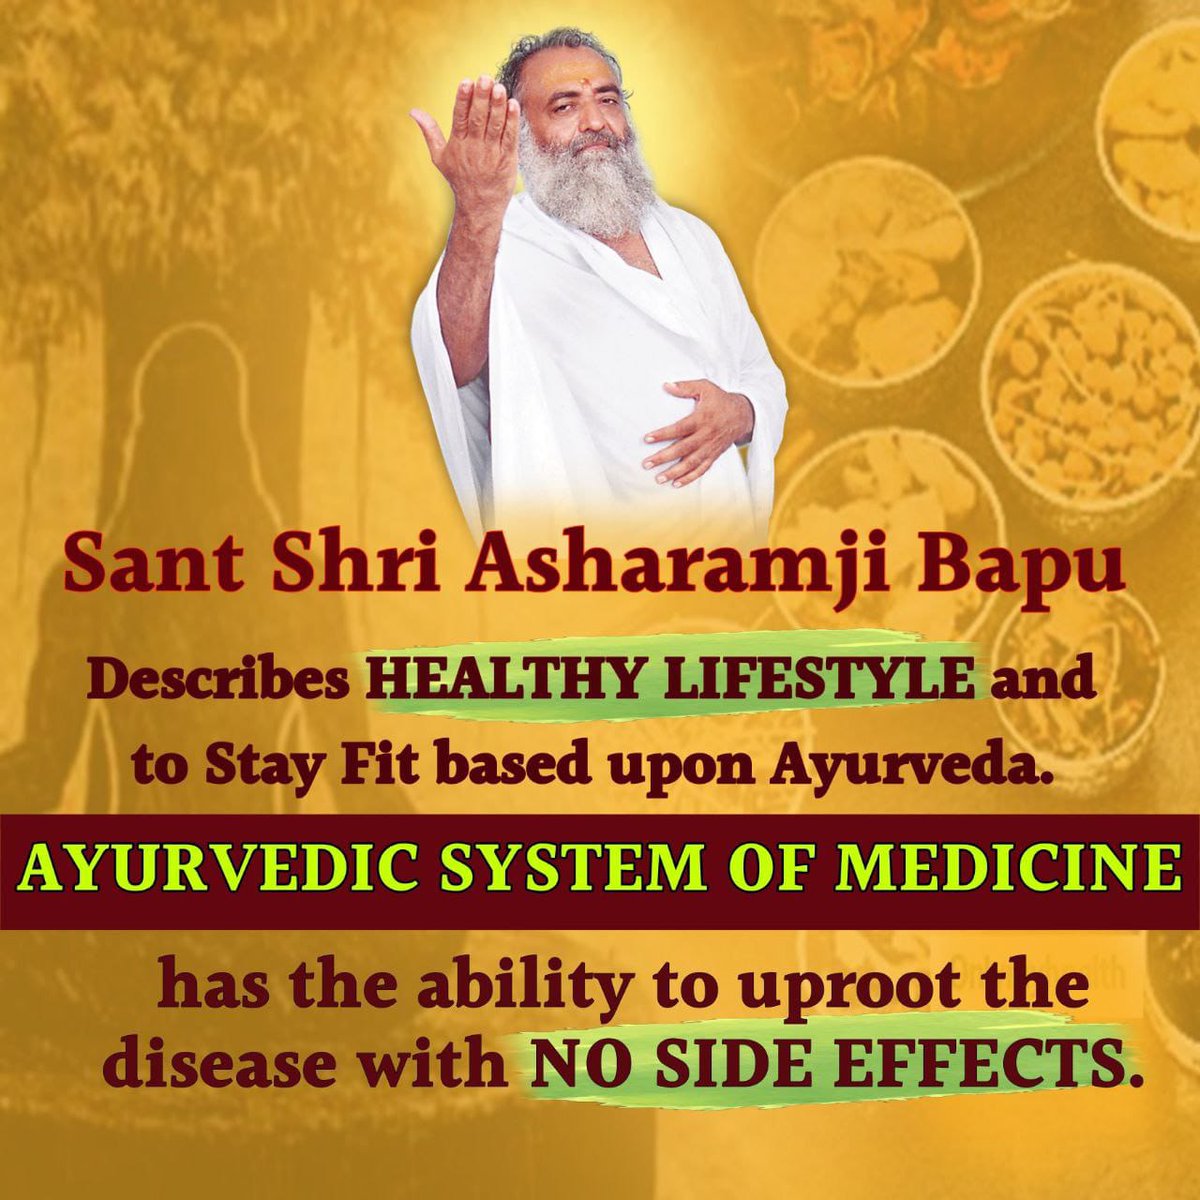 Sant Shri Asharamji Bapu says ayurved has the potency to uproot the disease and rejenuvate the body without any side effect. Let's embark Wellness Journey and Healthy Living by following principles of 
#आयुर्वेदामृत